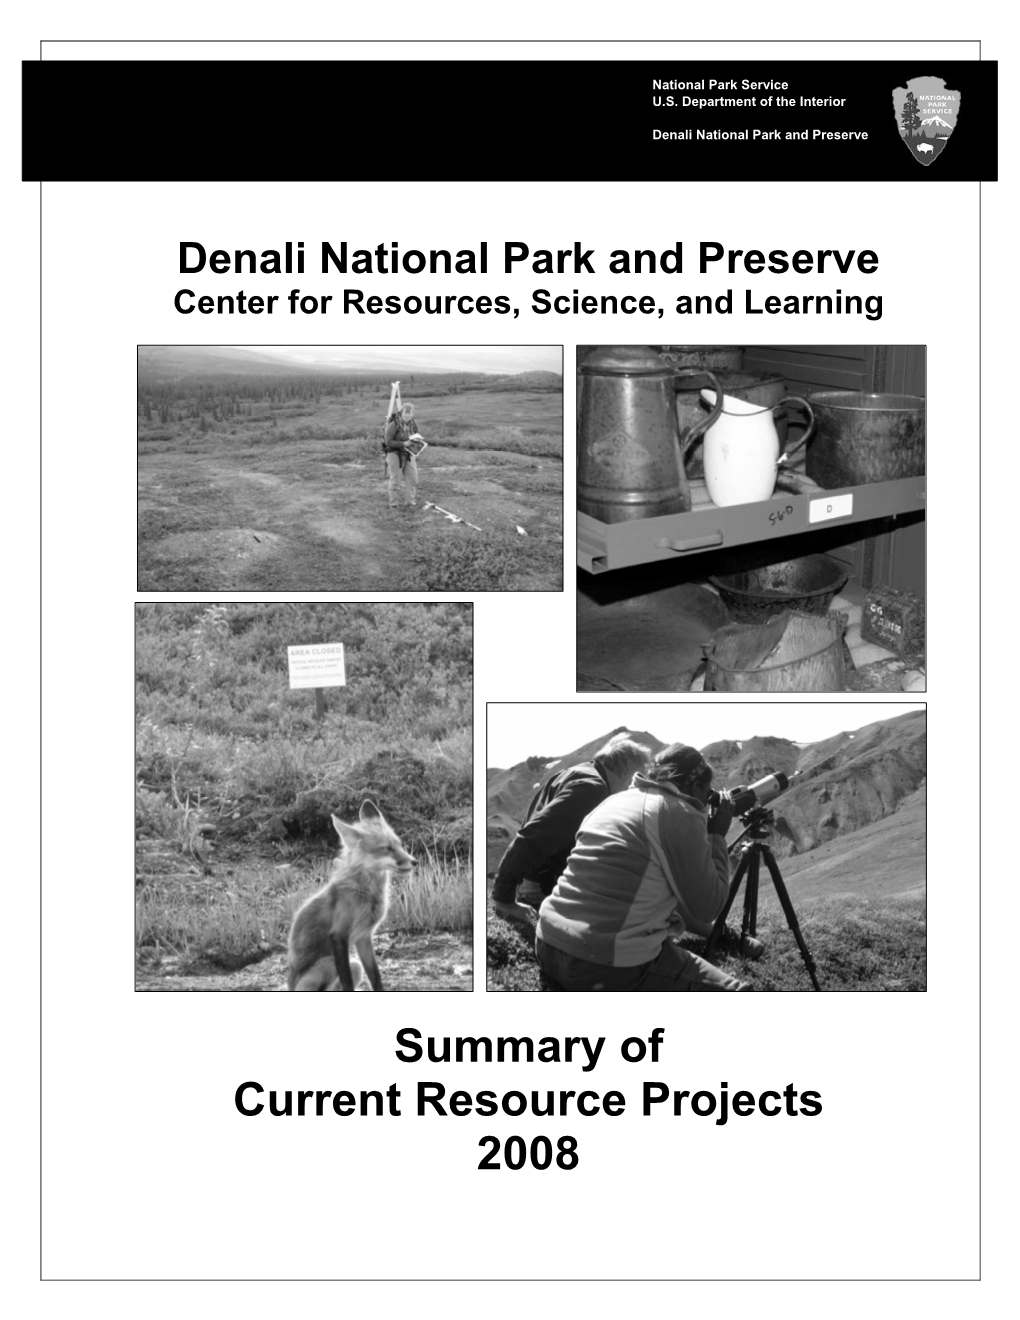 Summary of Current Resource Projects 2008